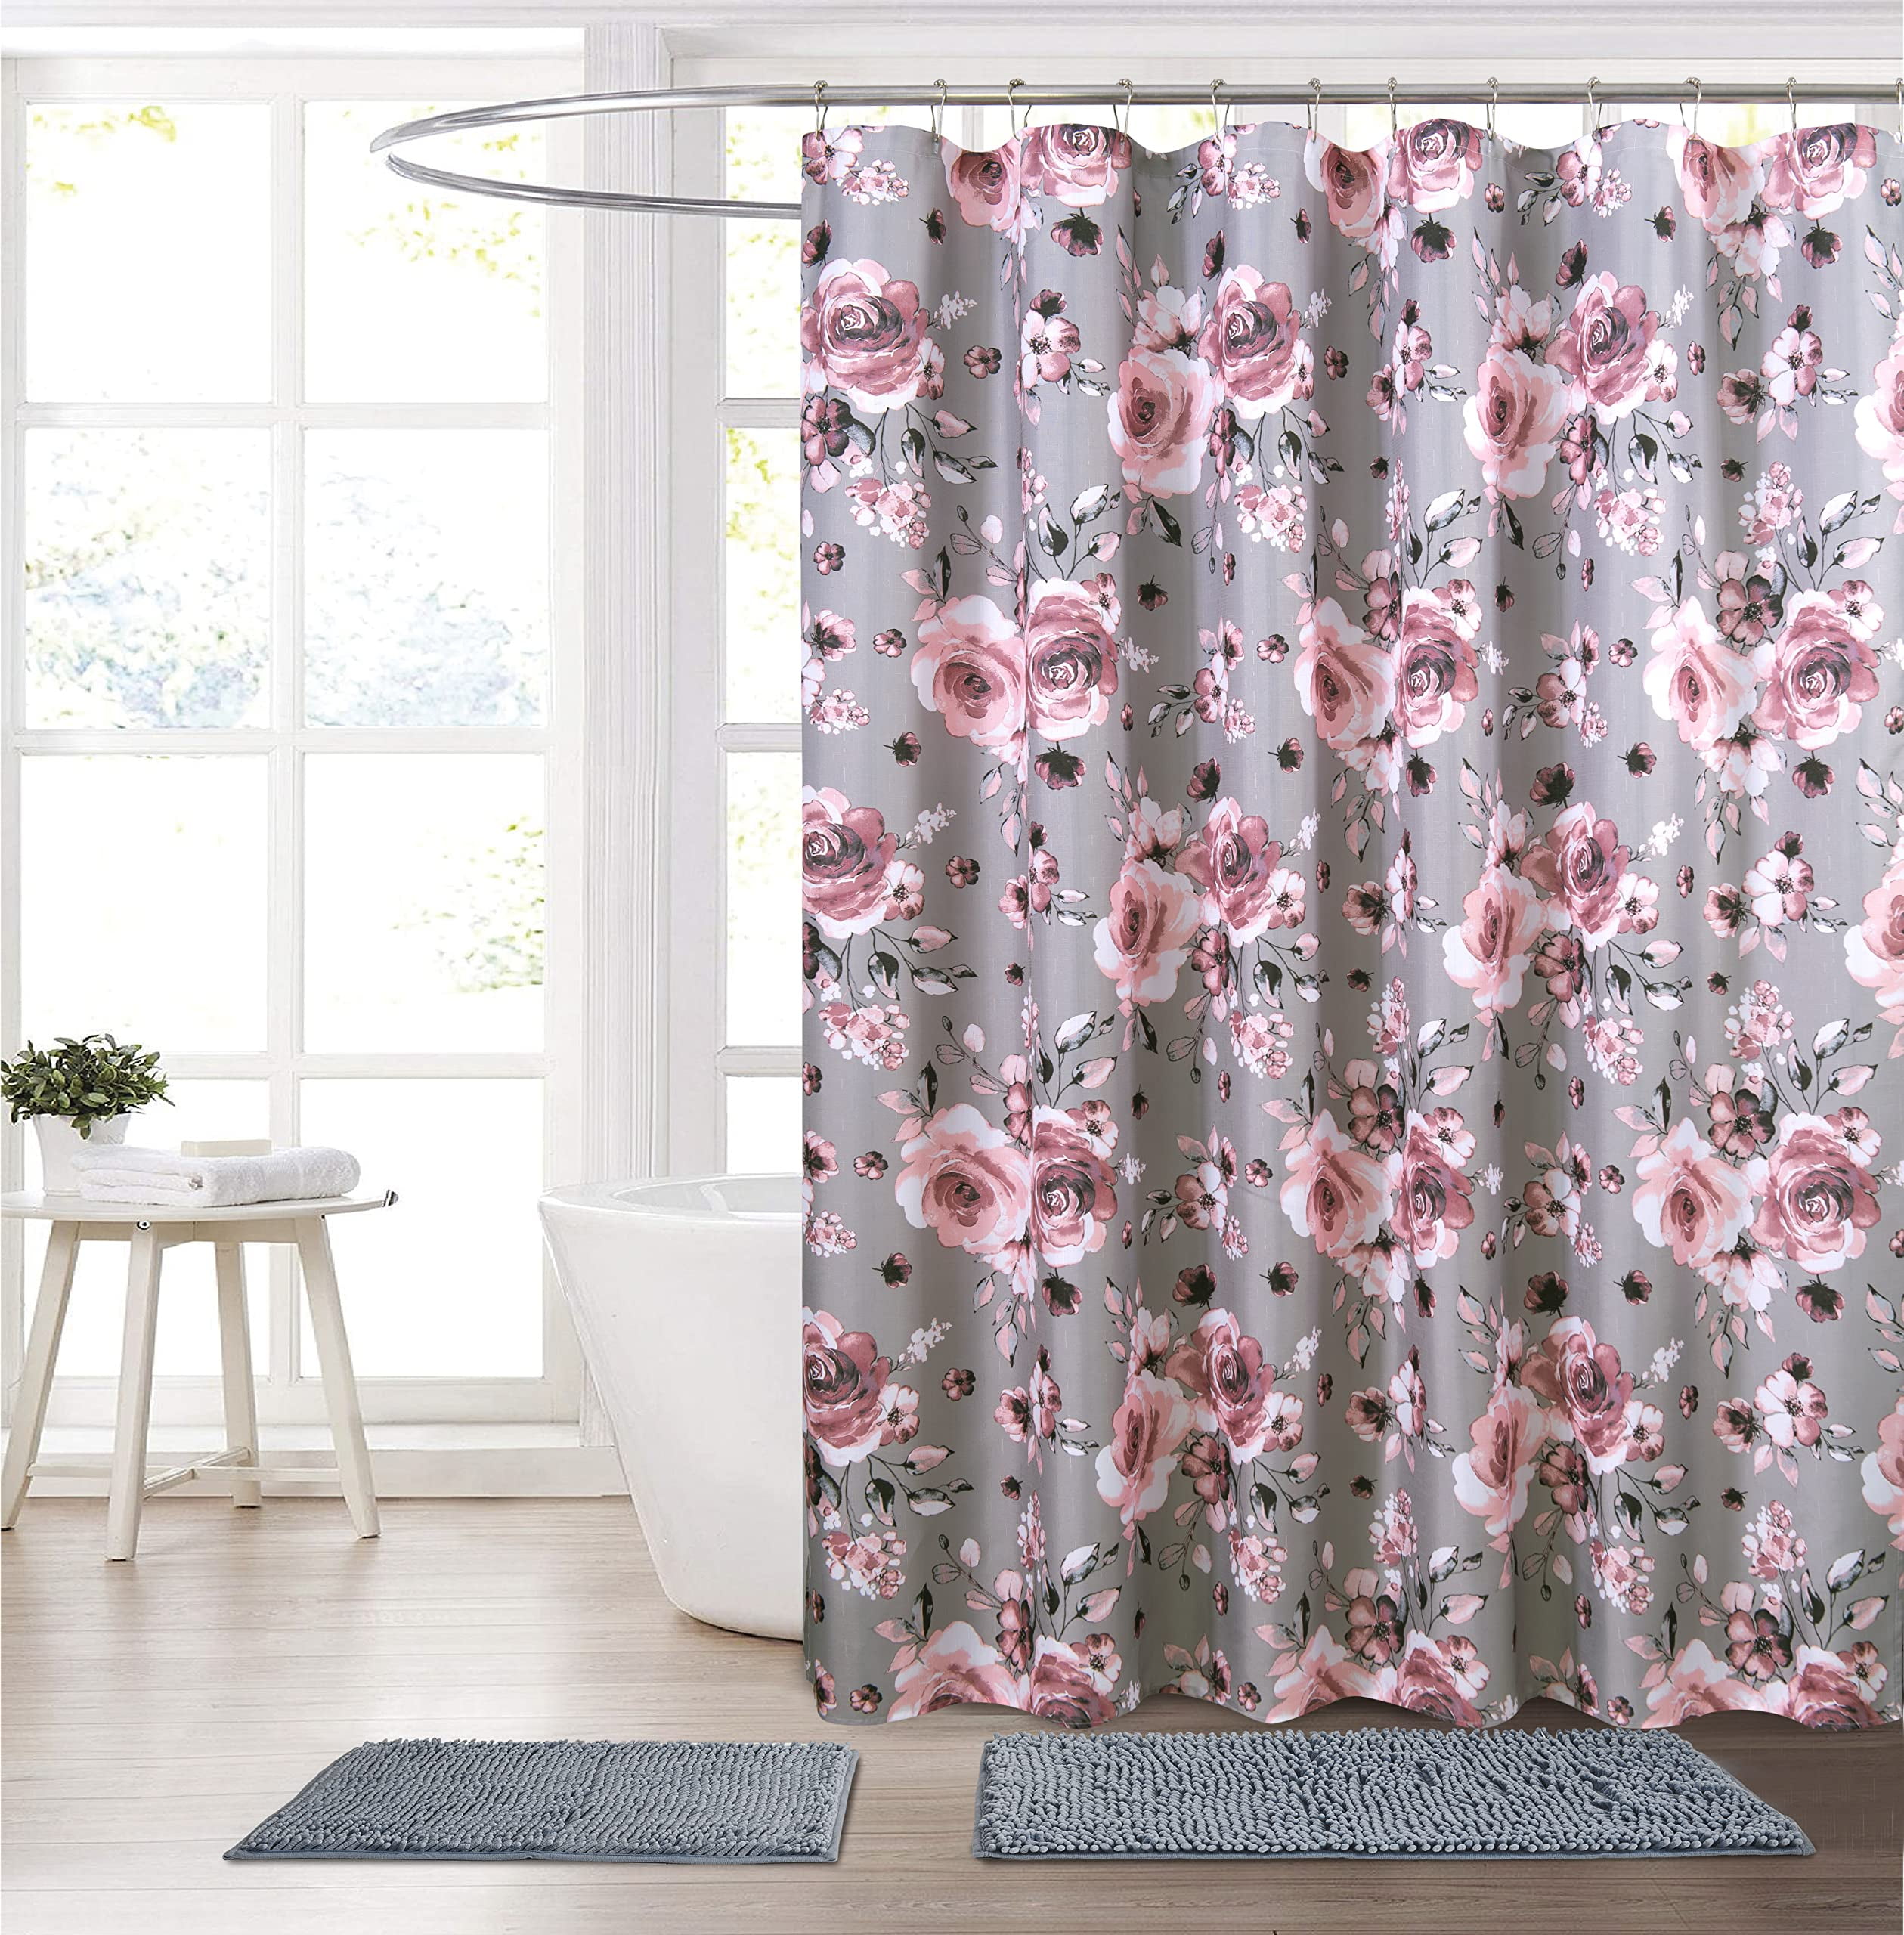 Pretty Floral Botanical Farmhouse Gorgeous Chic Waterproof Fabric Shower Curtain 